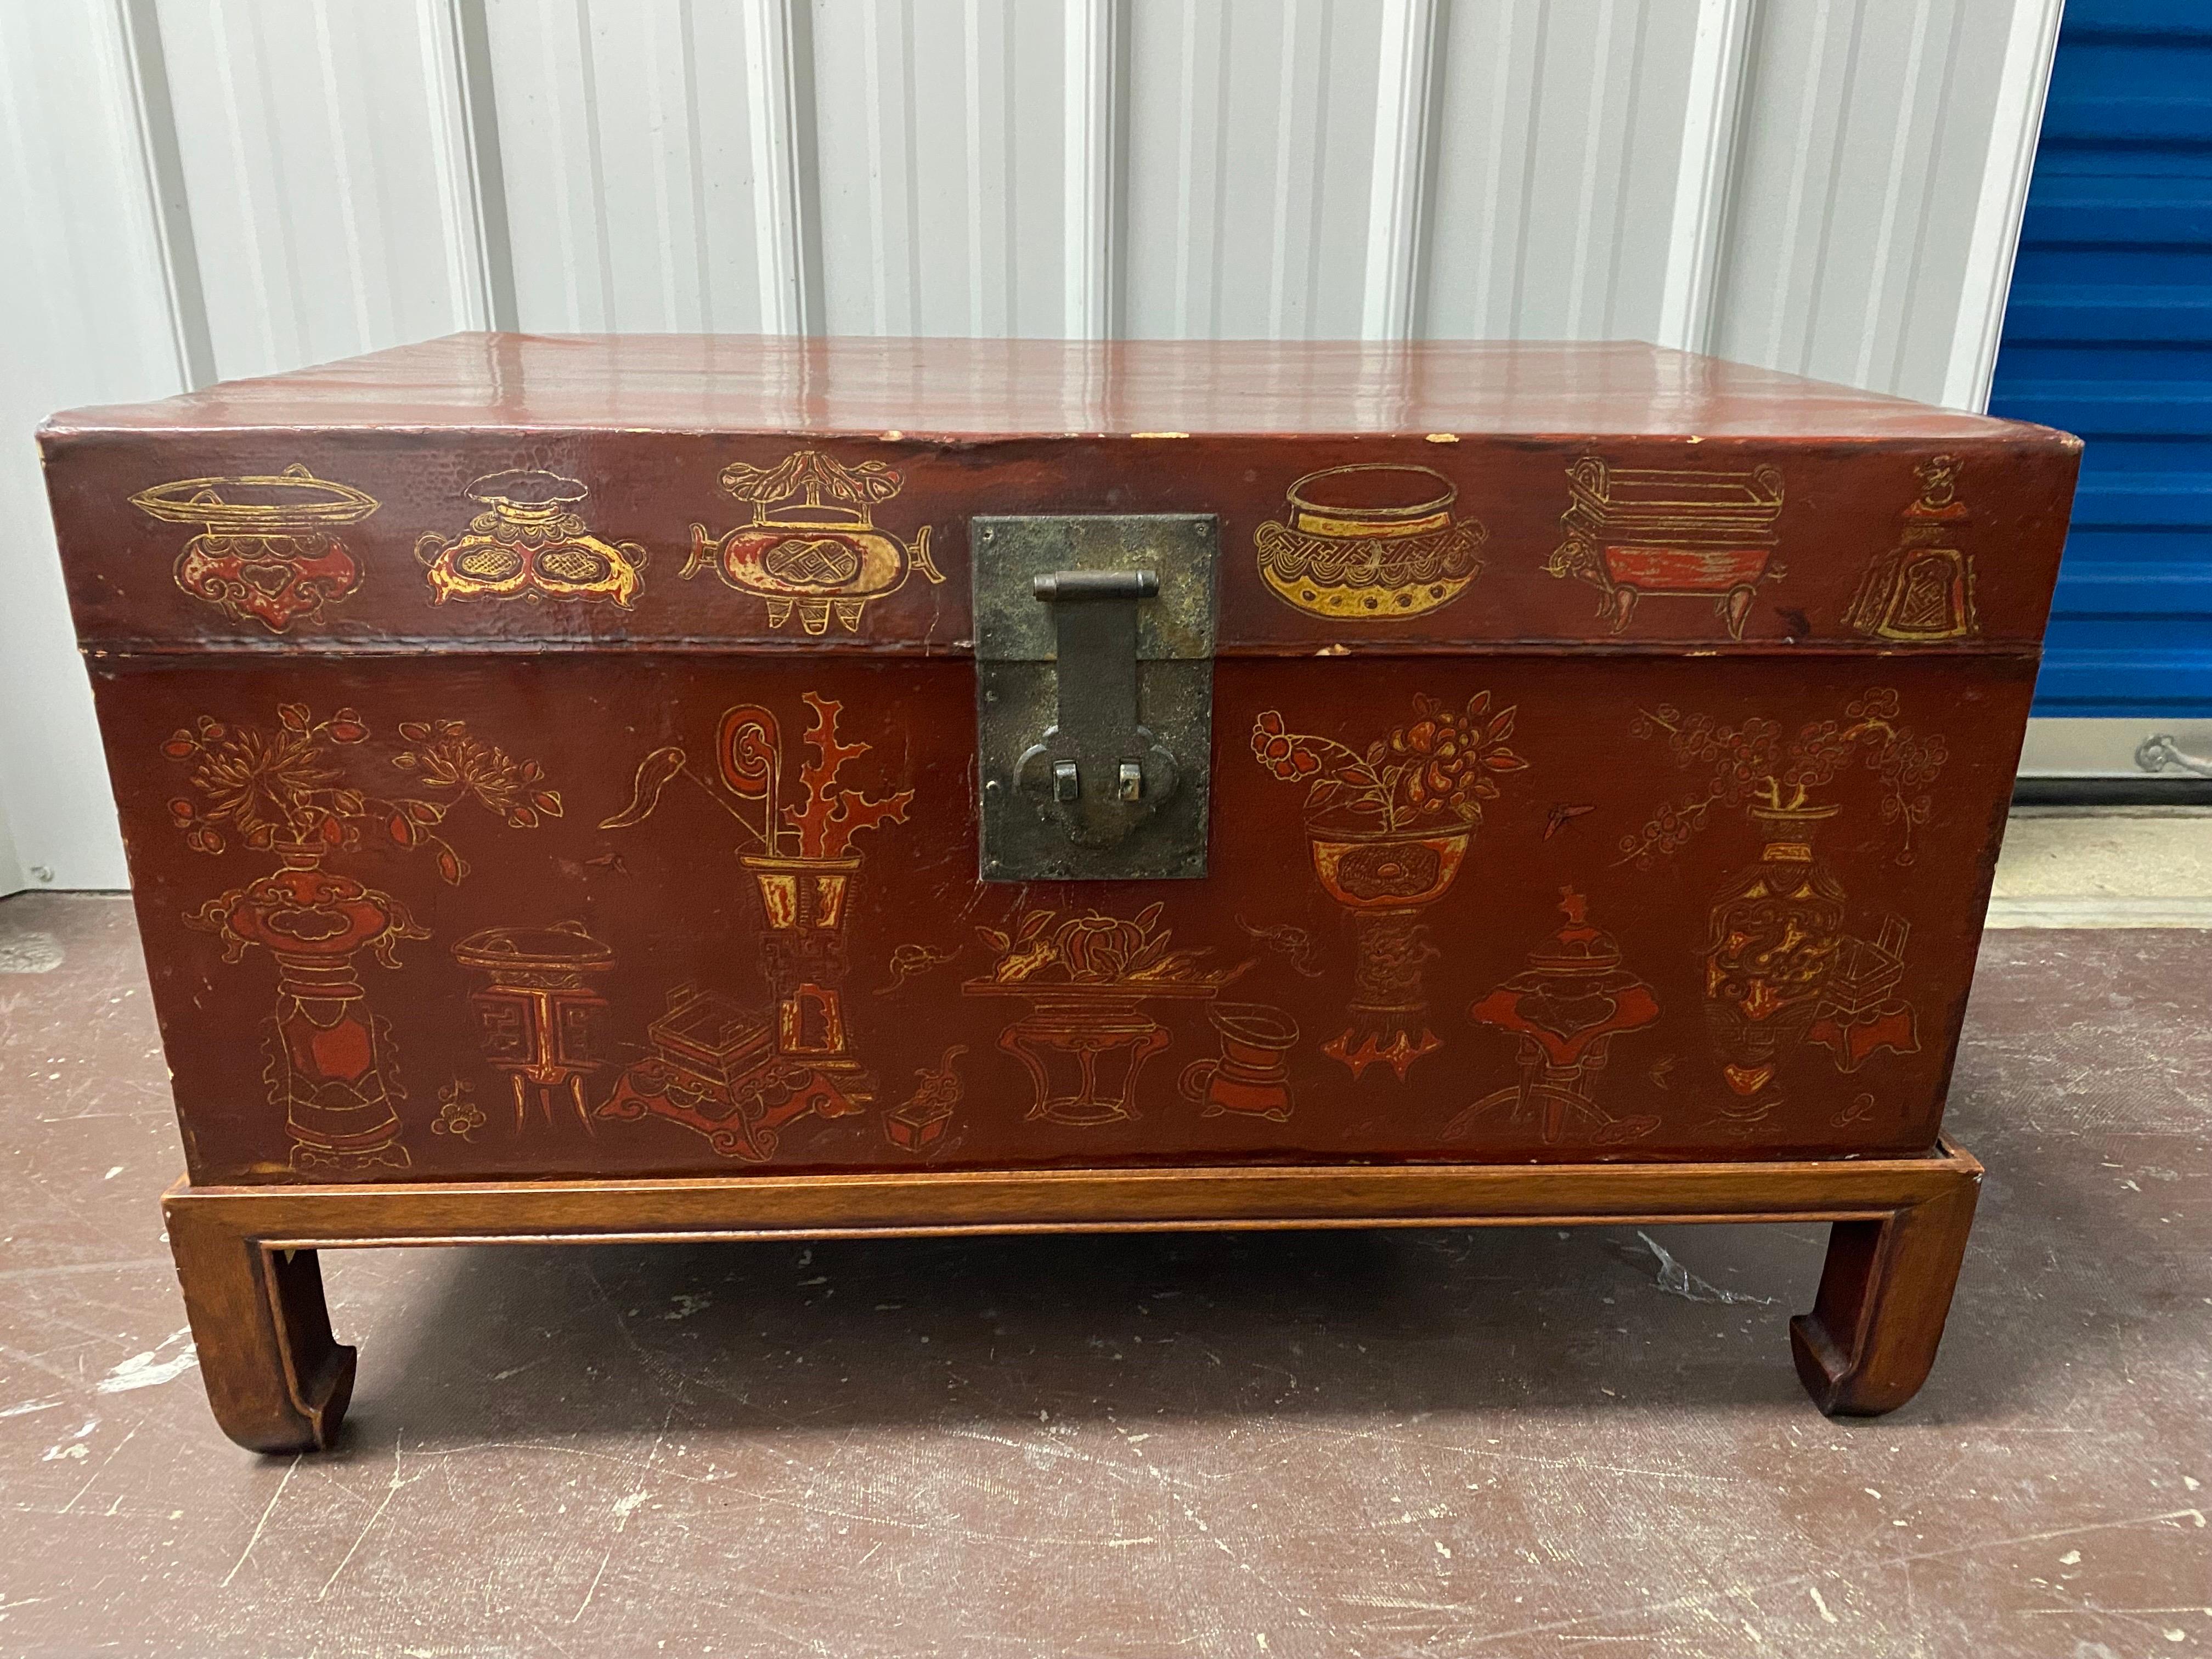 Late 19th Century Chinese Export Painted Leather Chest on Later Stand.  Deep red paint on leather wrapped wood trunk/chest. The front is adorned in beautiful gold painted Chinese vessels, some with flowers. The sides are more simple gold painted